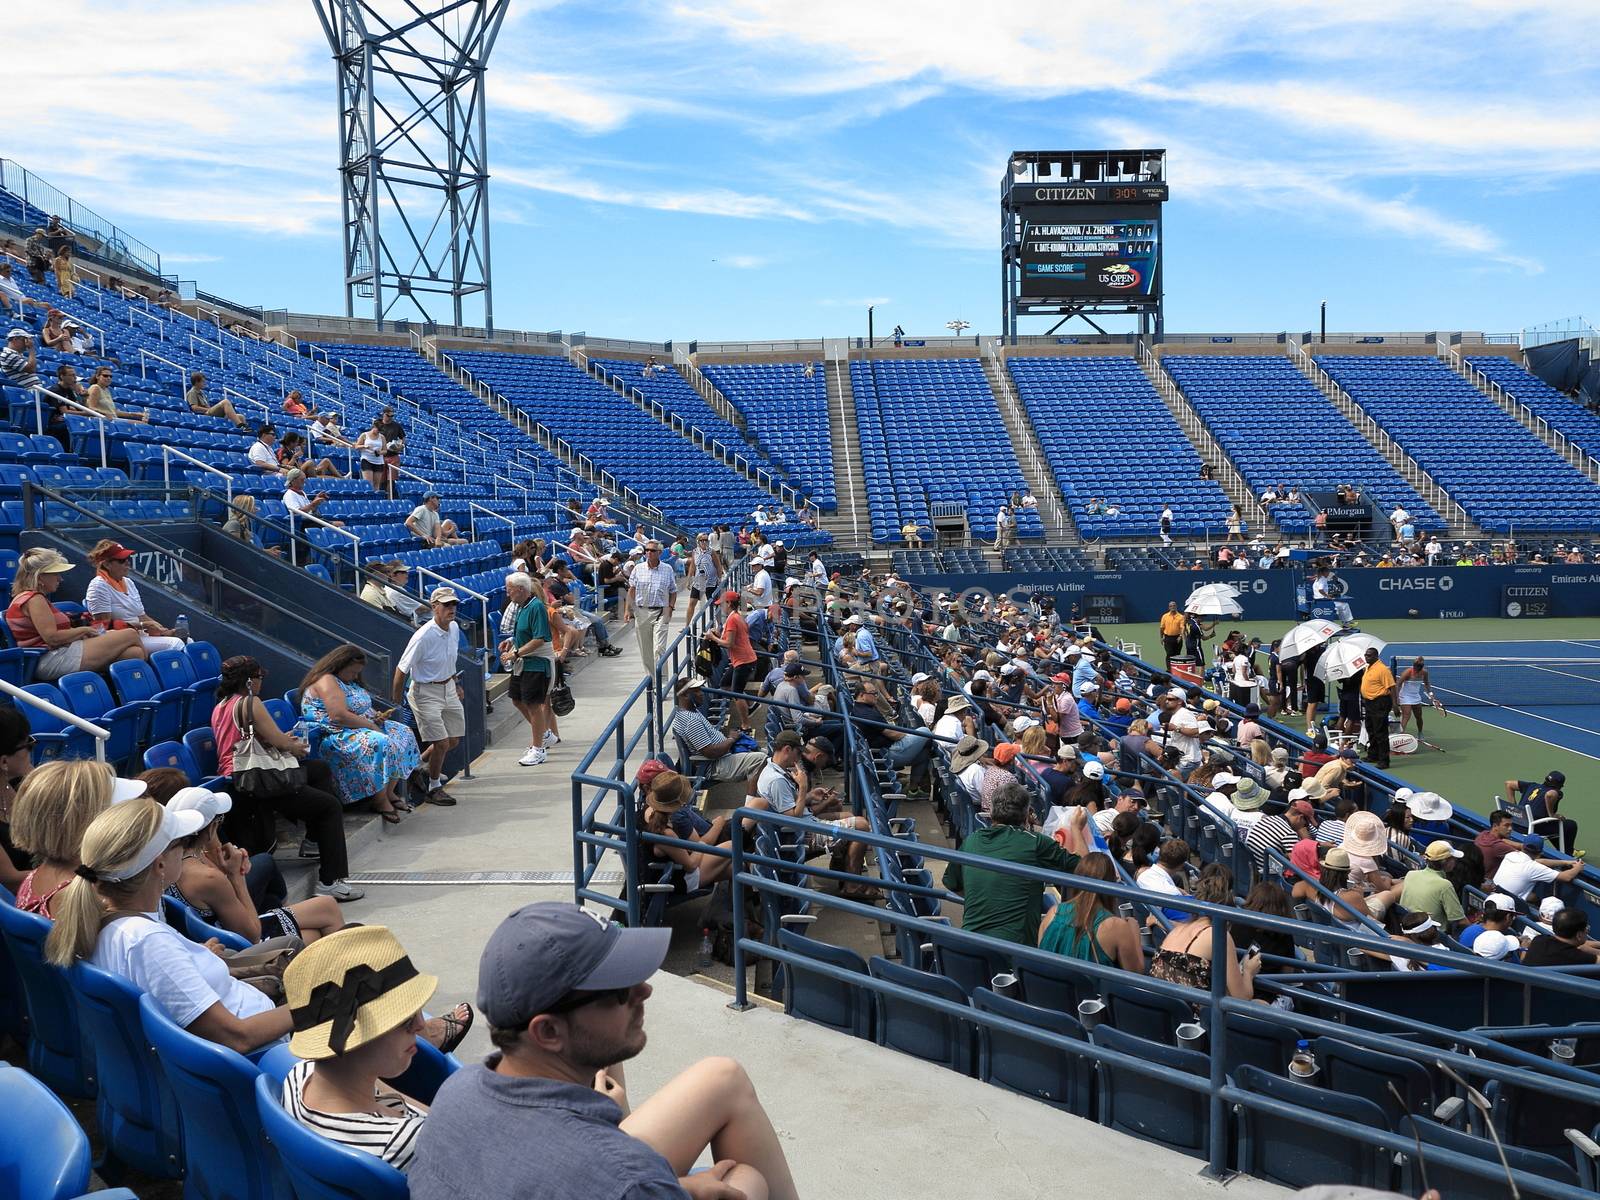 Fans at Louis Armstrong Stadium, the original US Open venue at the Billie Jean King Tennis Center.